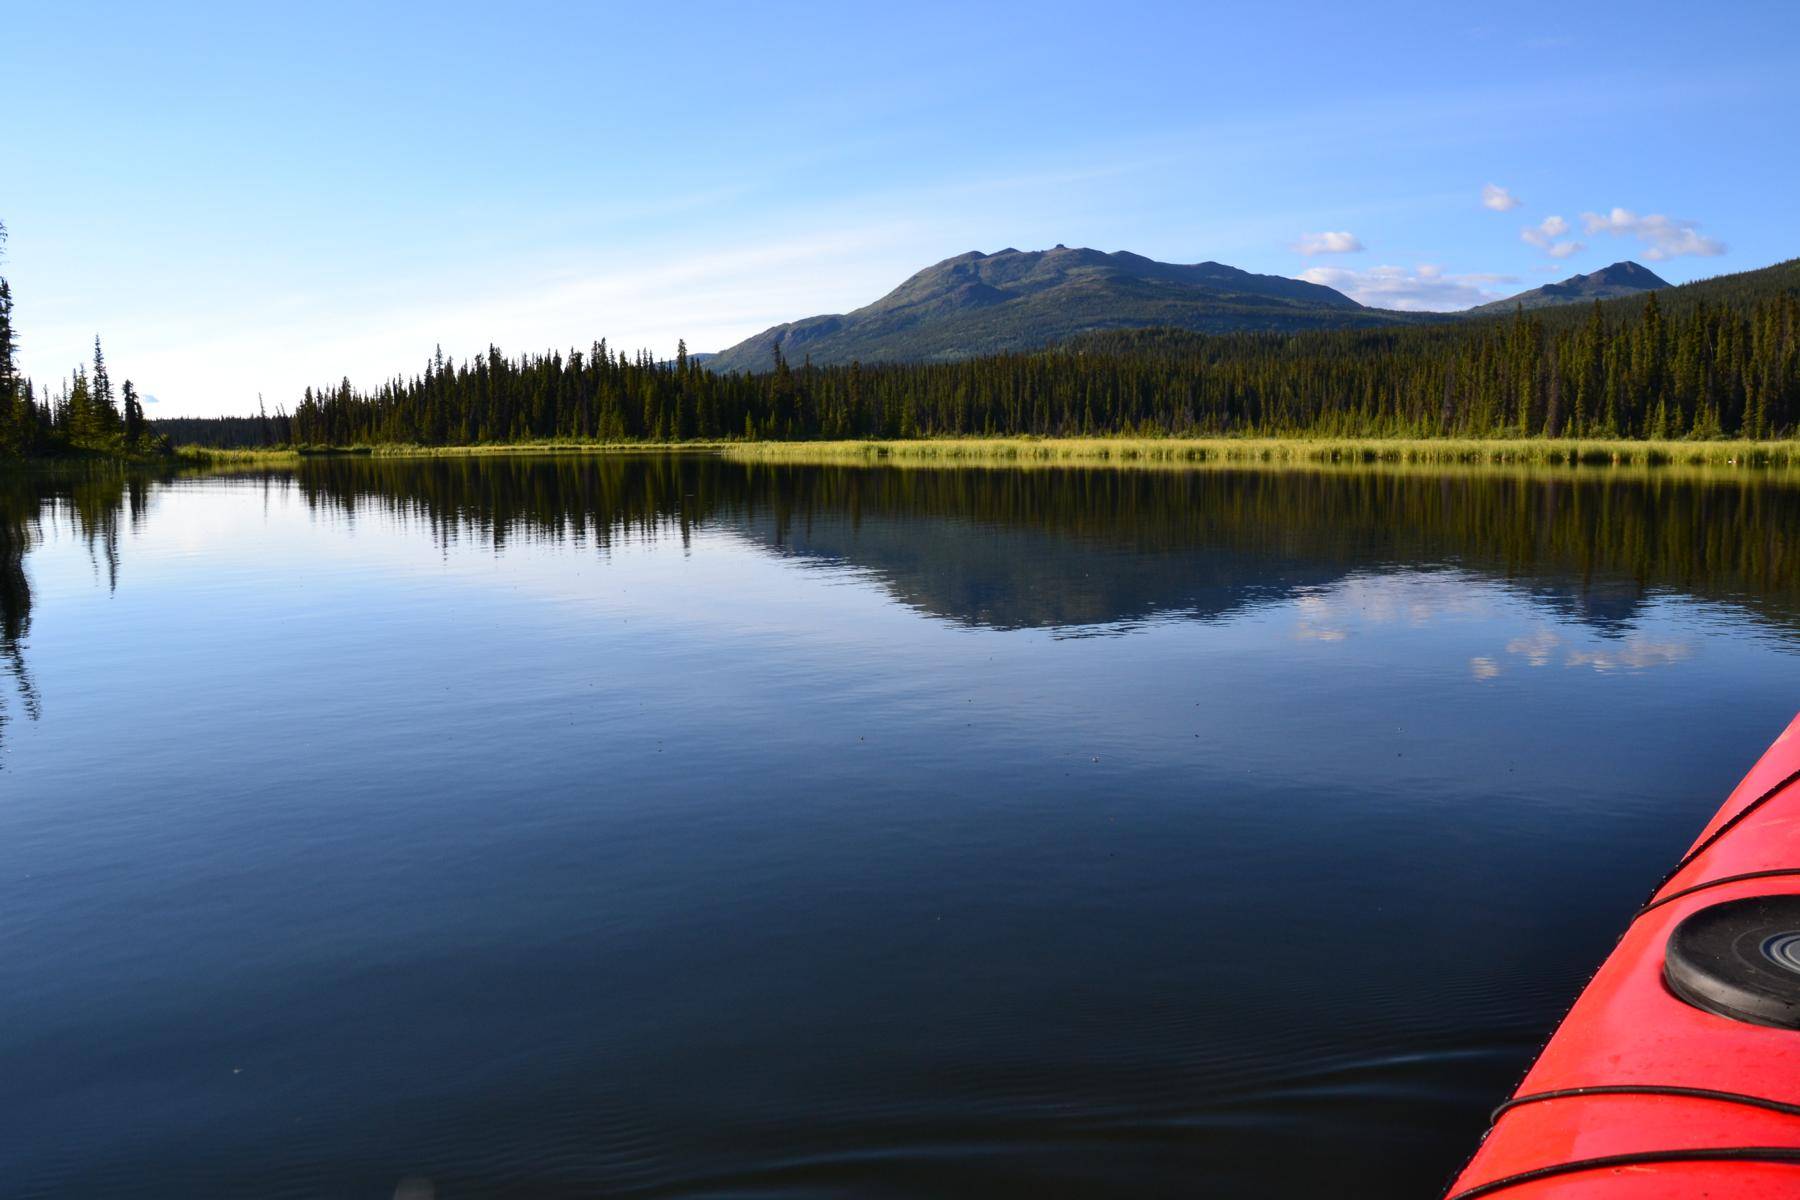 View from a kayak over the calm lake onto the mountains in the distance